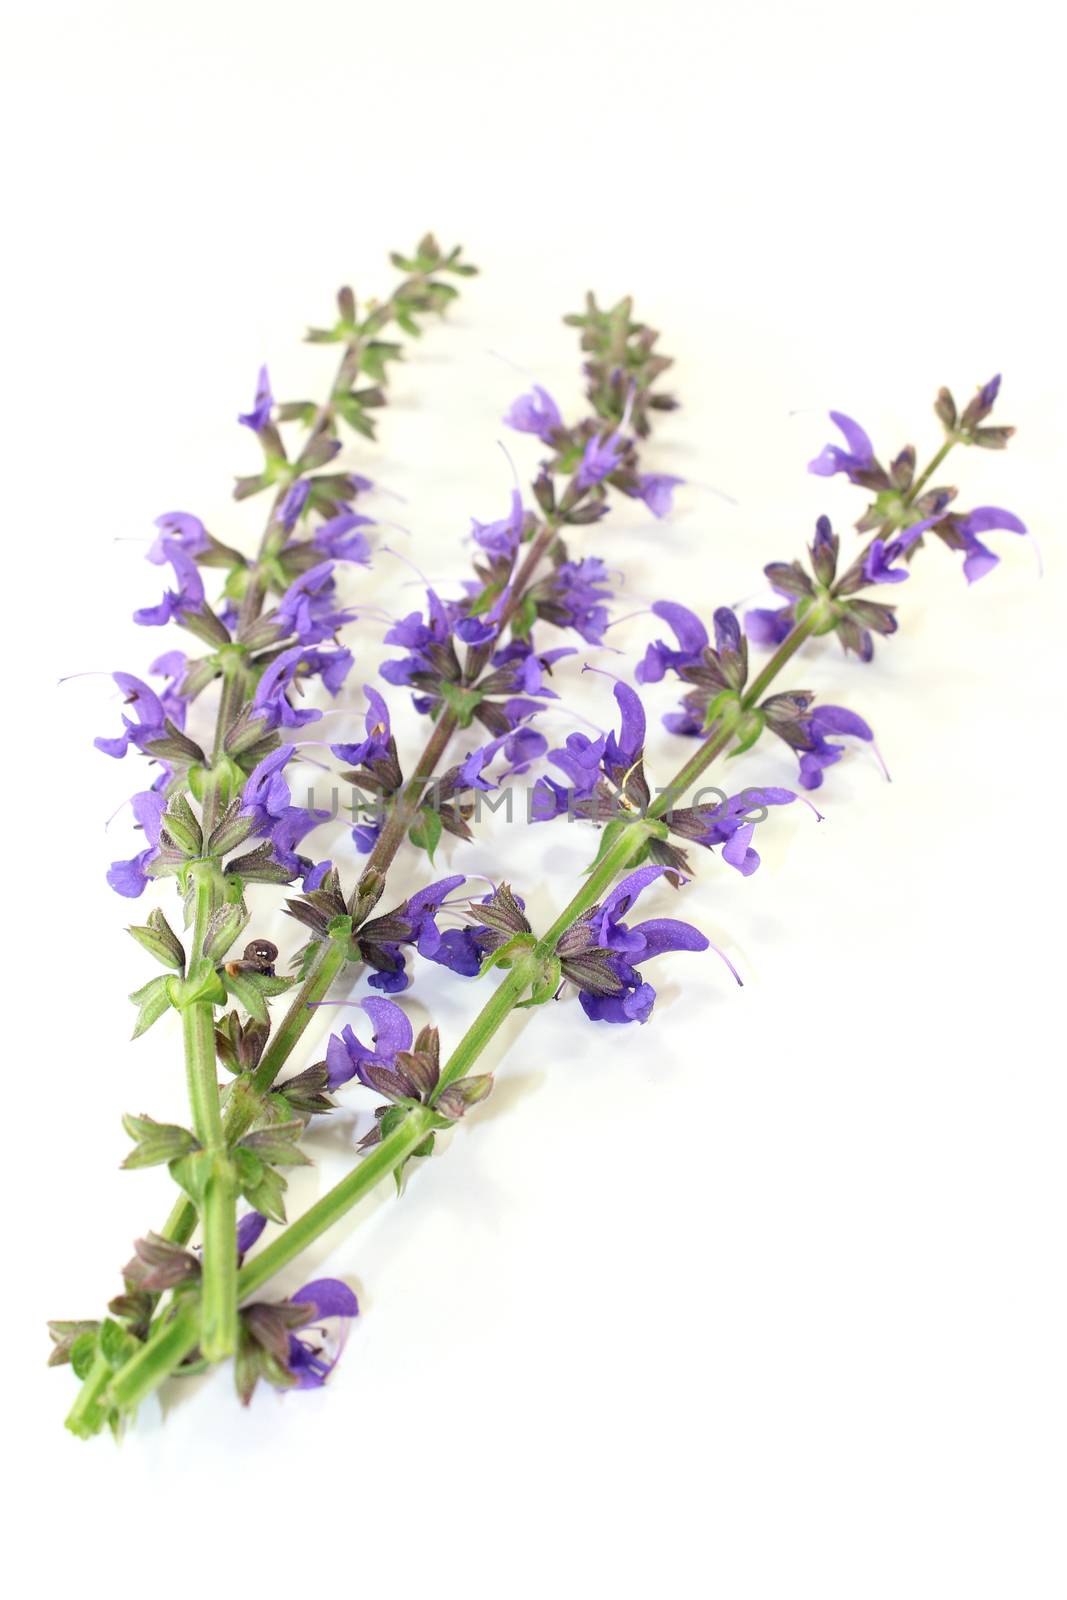 blue sage flowers on a bright background